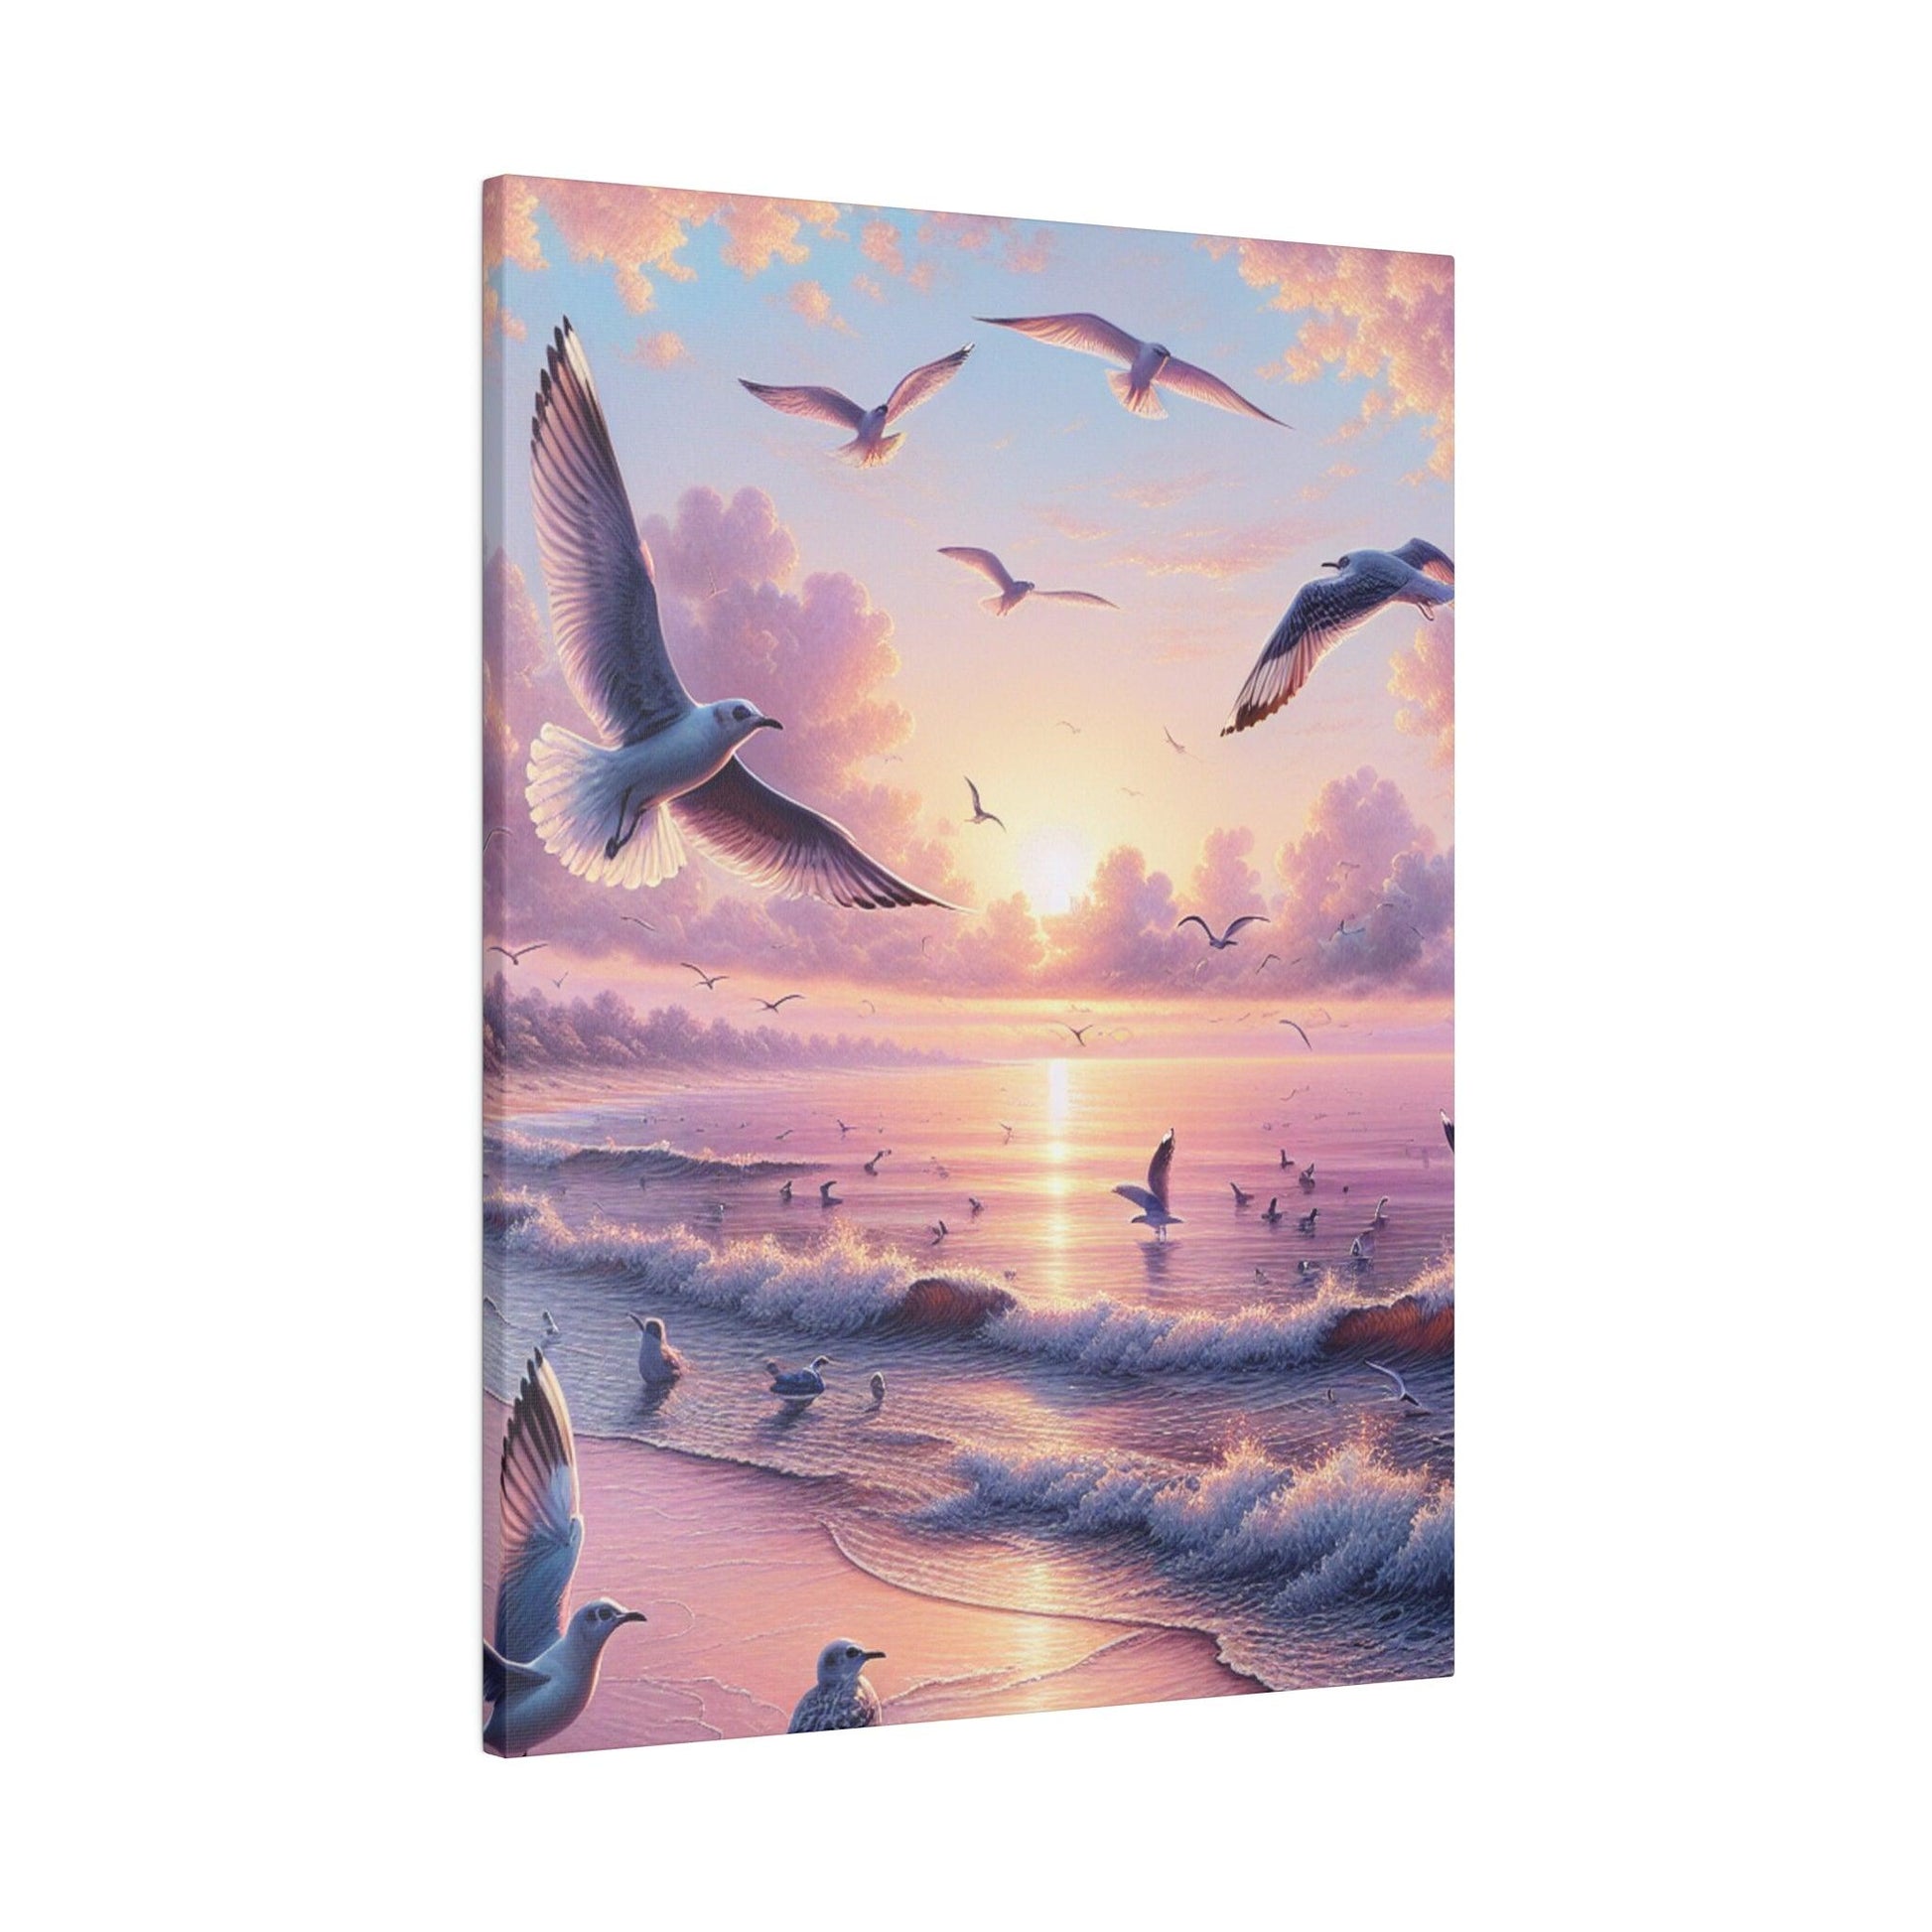 "Seagull Serenity: A Maritime Canvas Wall Art" - The Alice Gallery